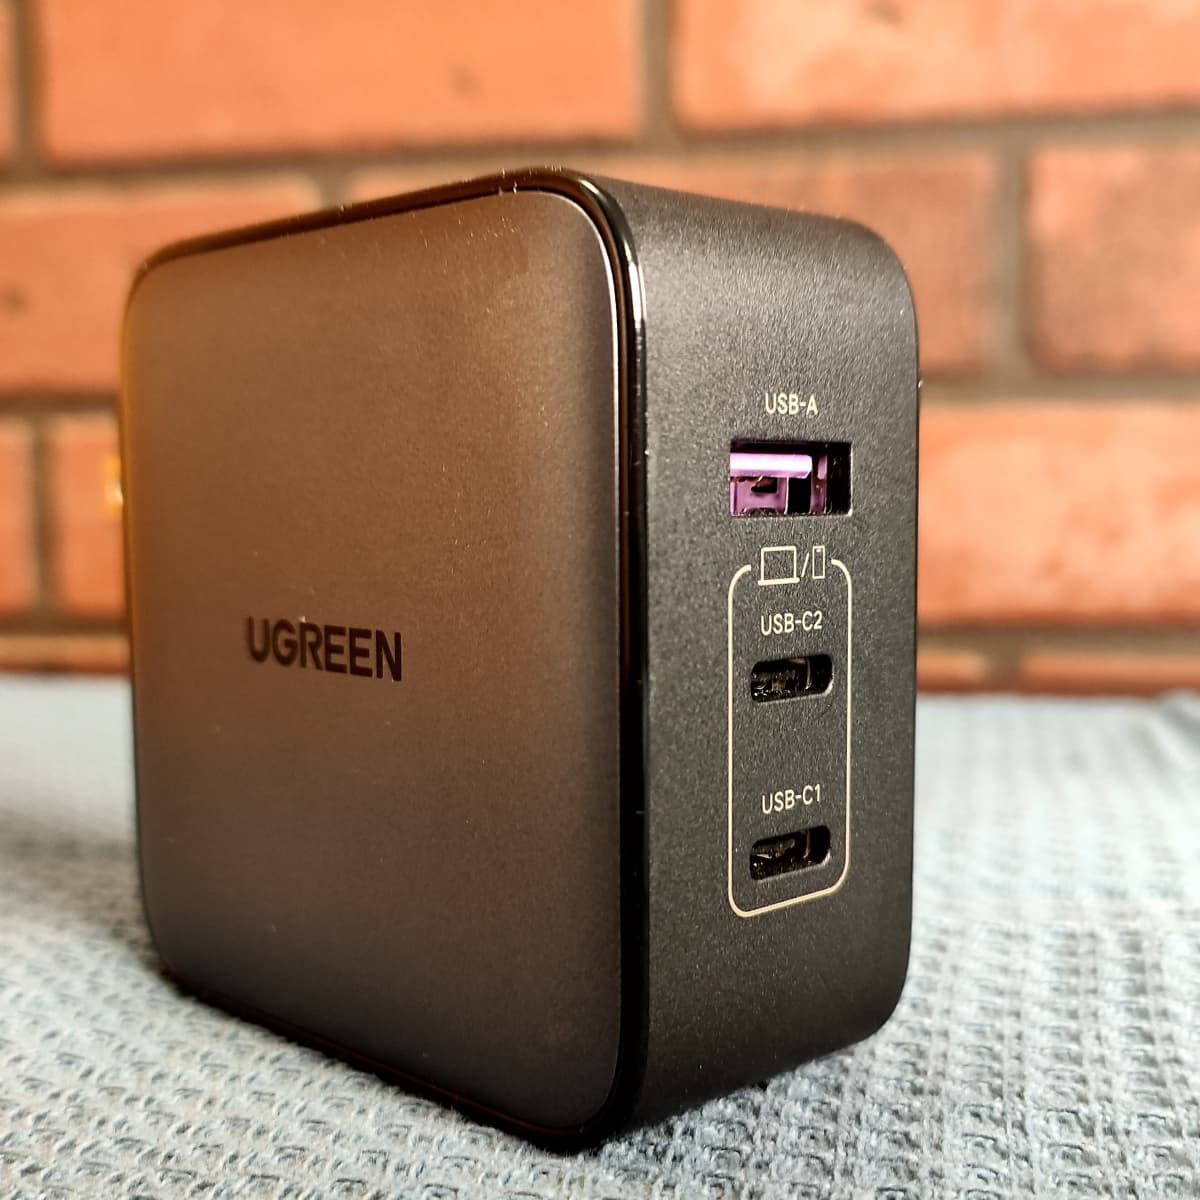 Review of the UGREEN 65W GaN Fast Charger - TurboFuture